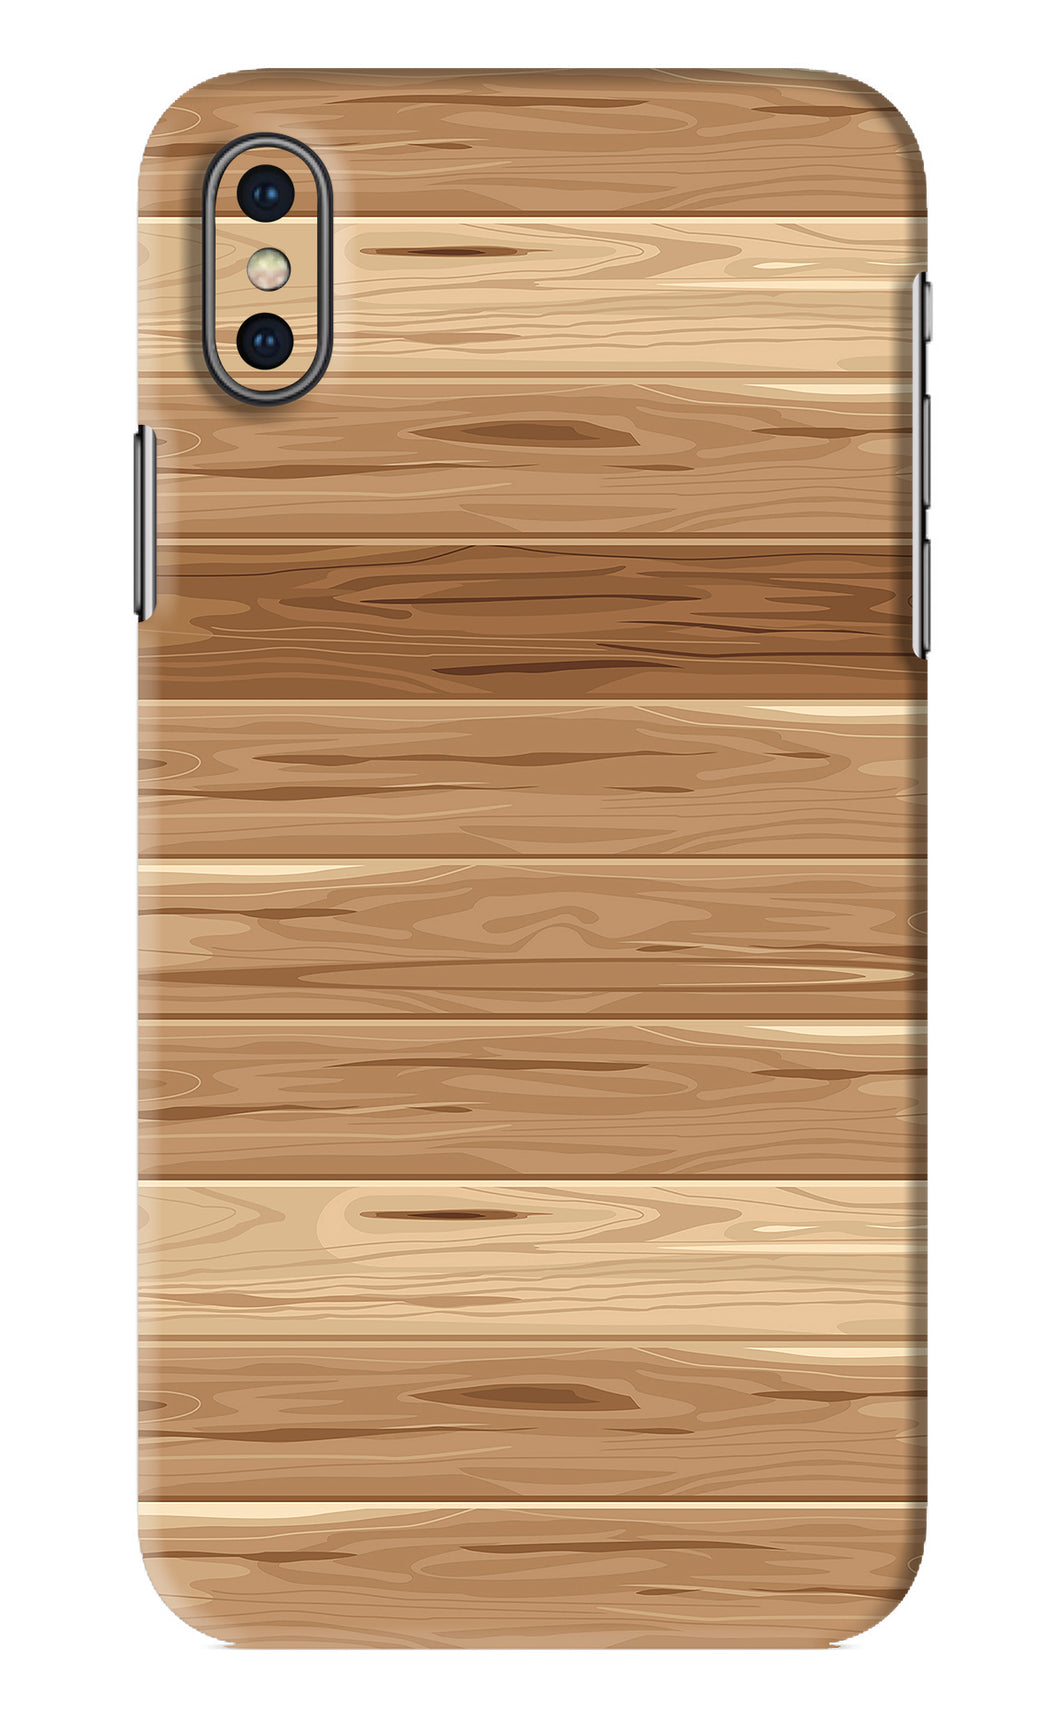 Wooden Vector iPhone X Back Skin Wrap